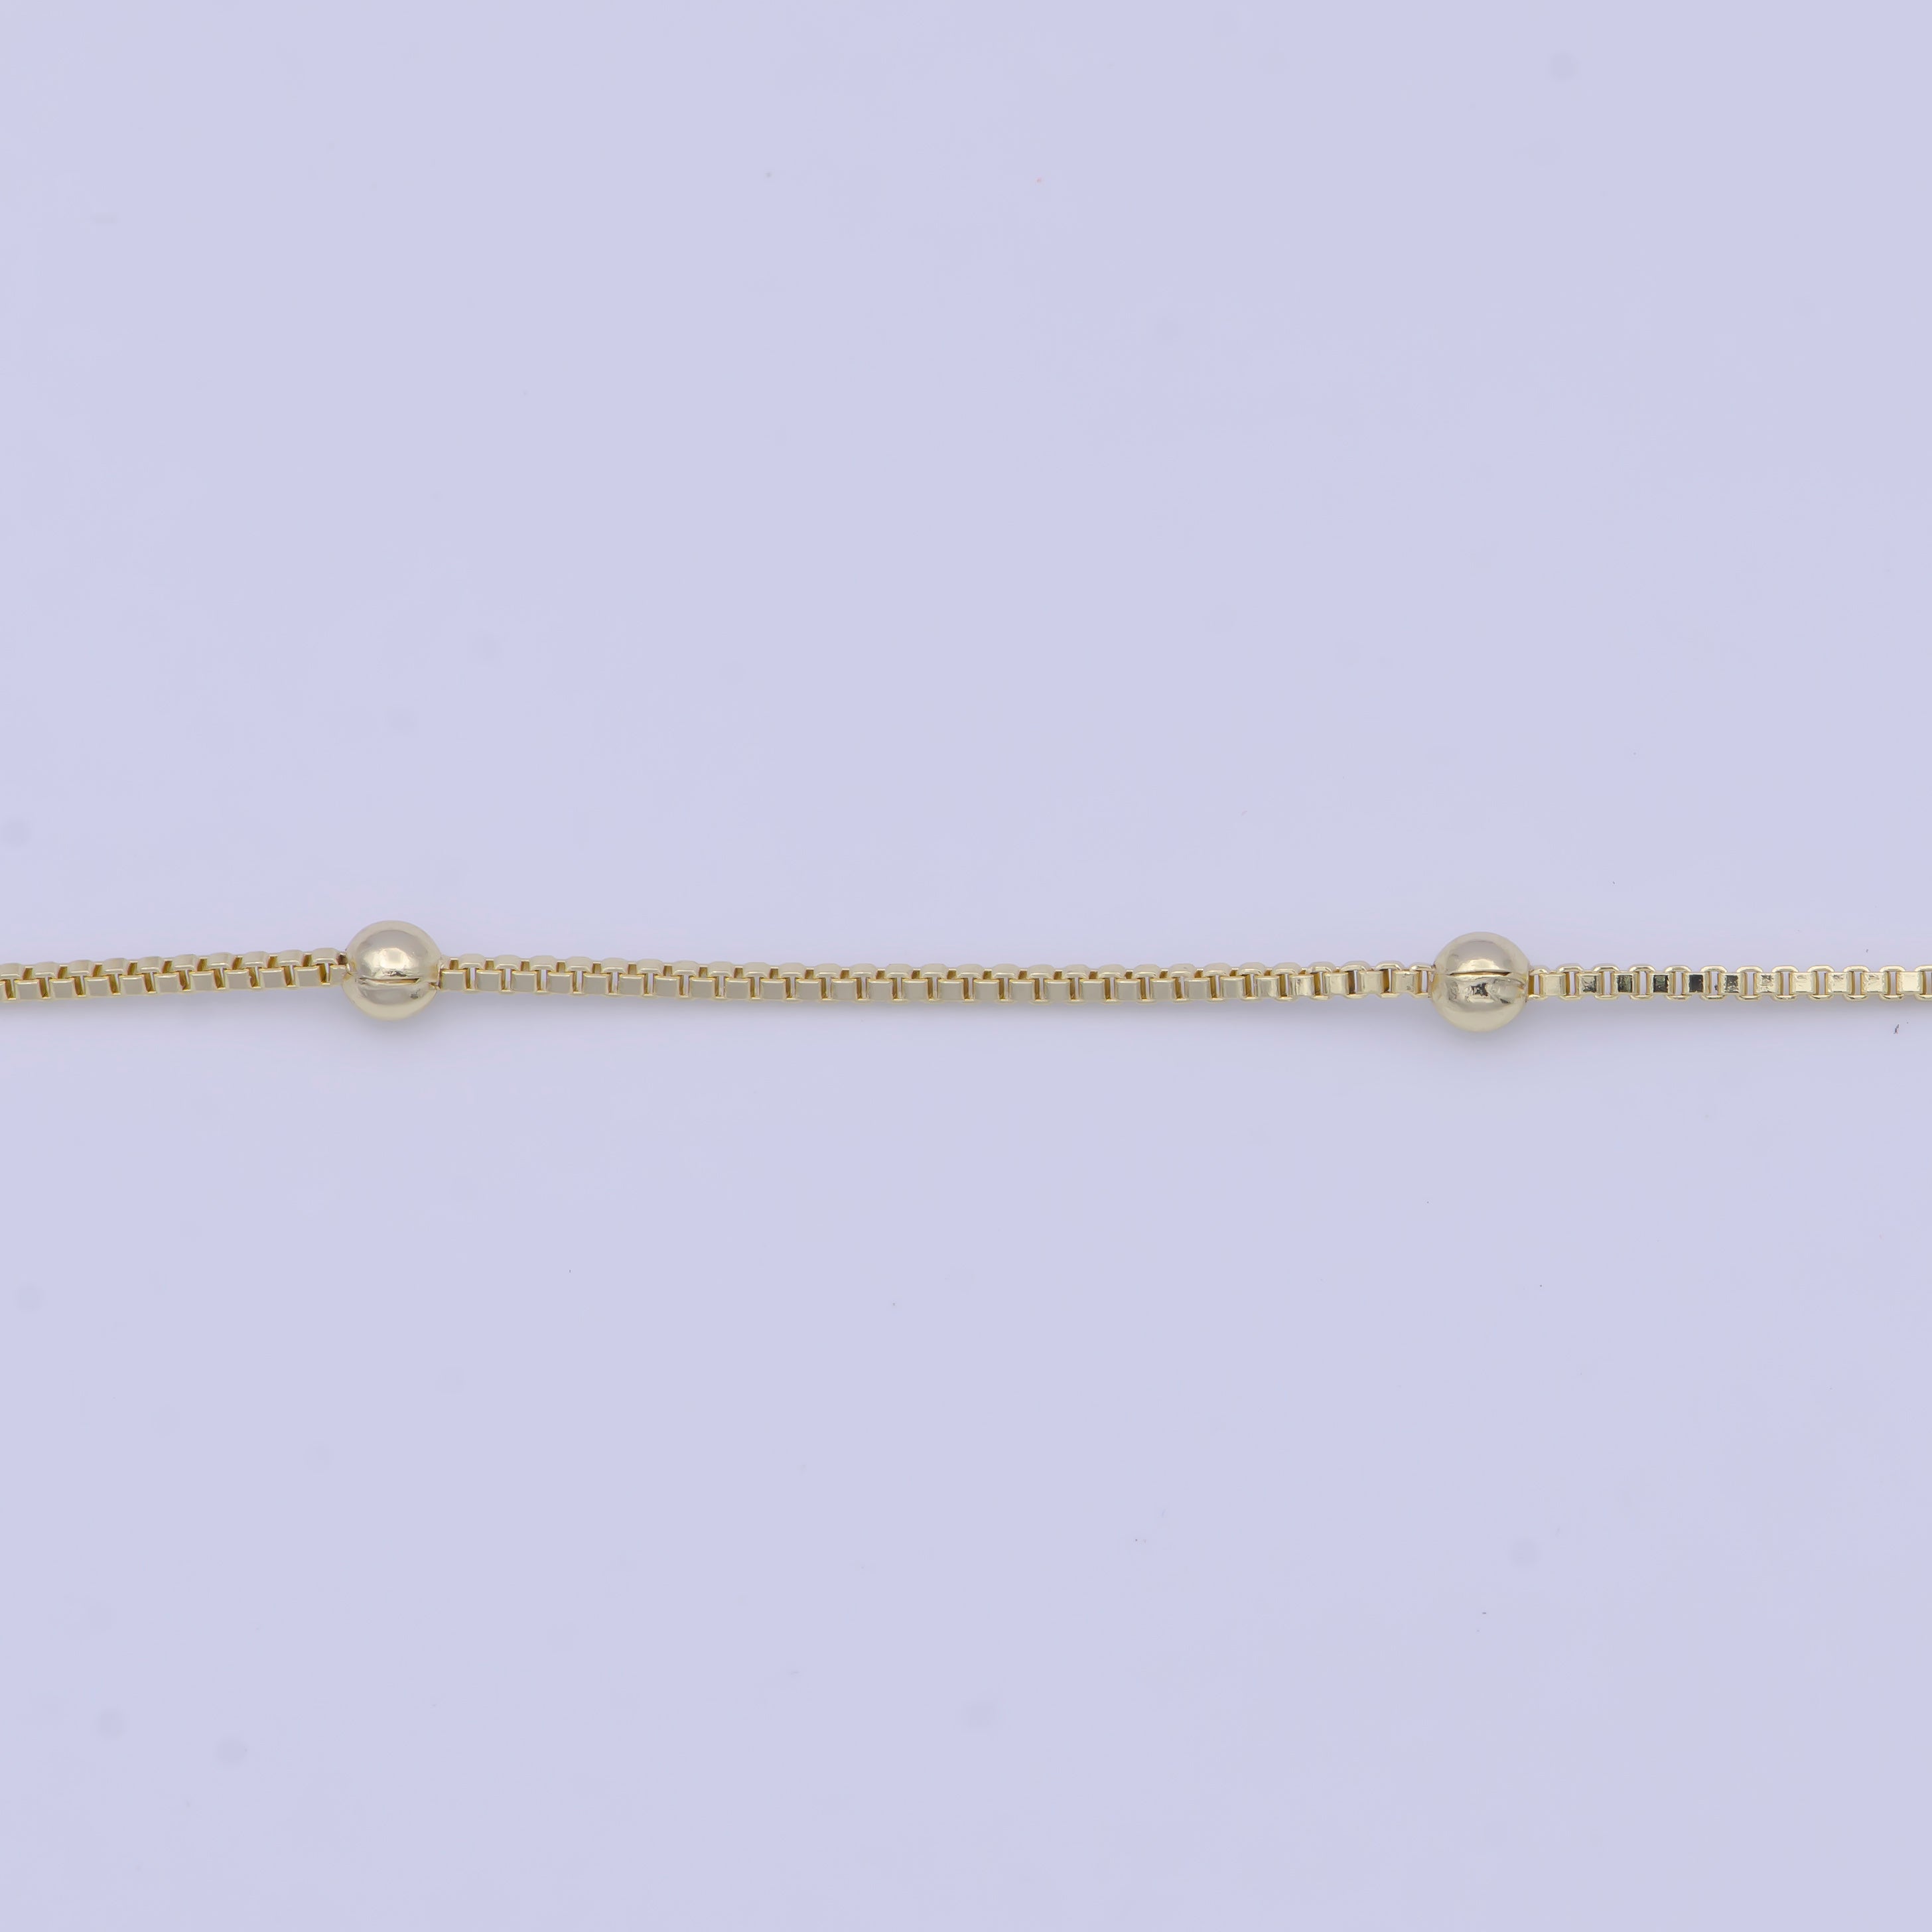 Fine Satellite Chain 18" Ready to Wear 14k Gold Filled Box Chain with Lobster Clasp, Simple Everyday Layering Necklace WA-1108 - DLUXCA